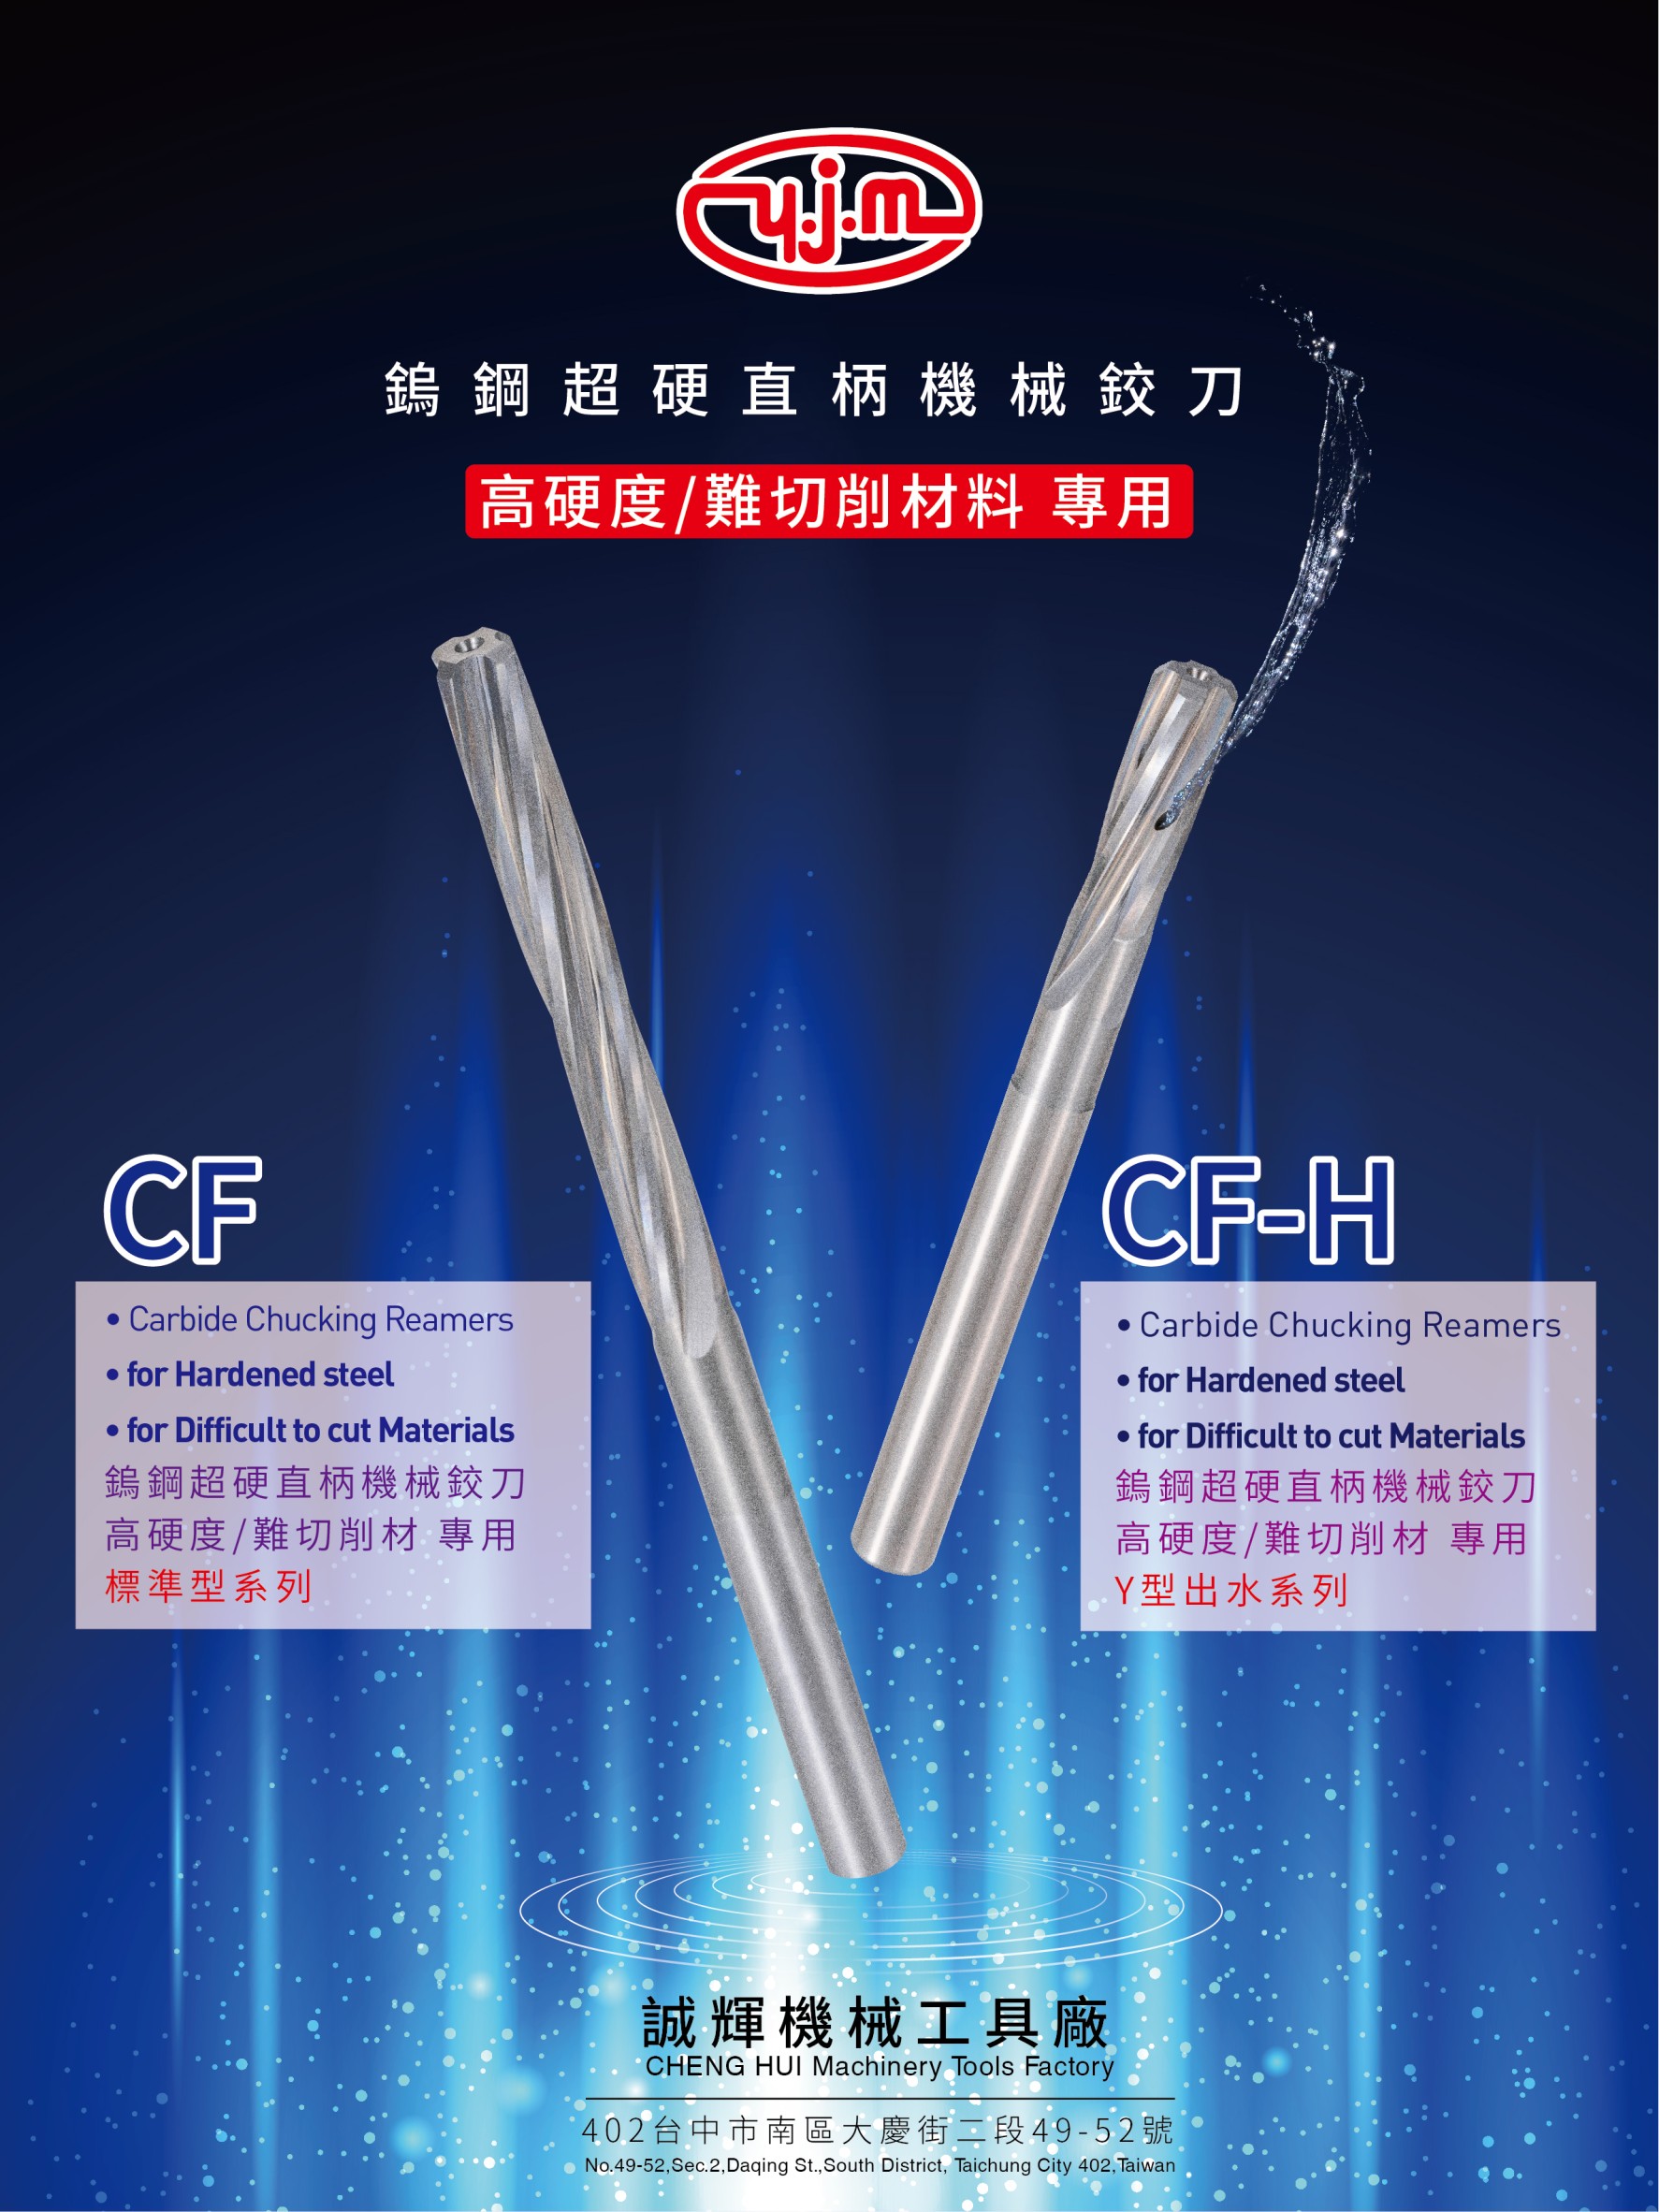 
                                Carbide Chucking Reamers / for Hardened steel / for Difficult to cut Materials
                            